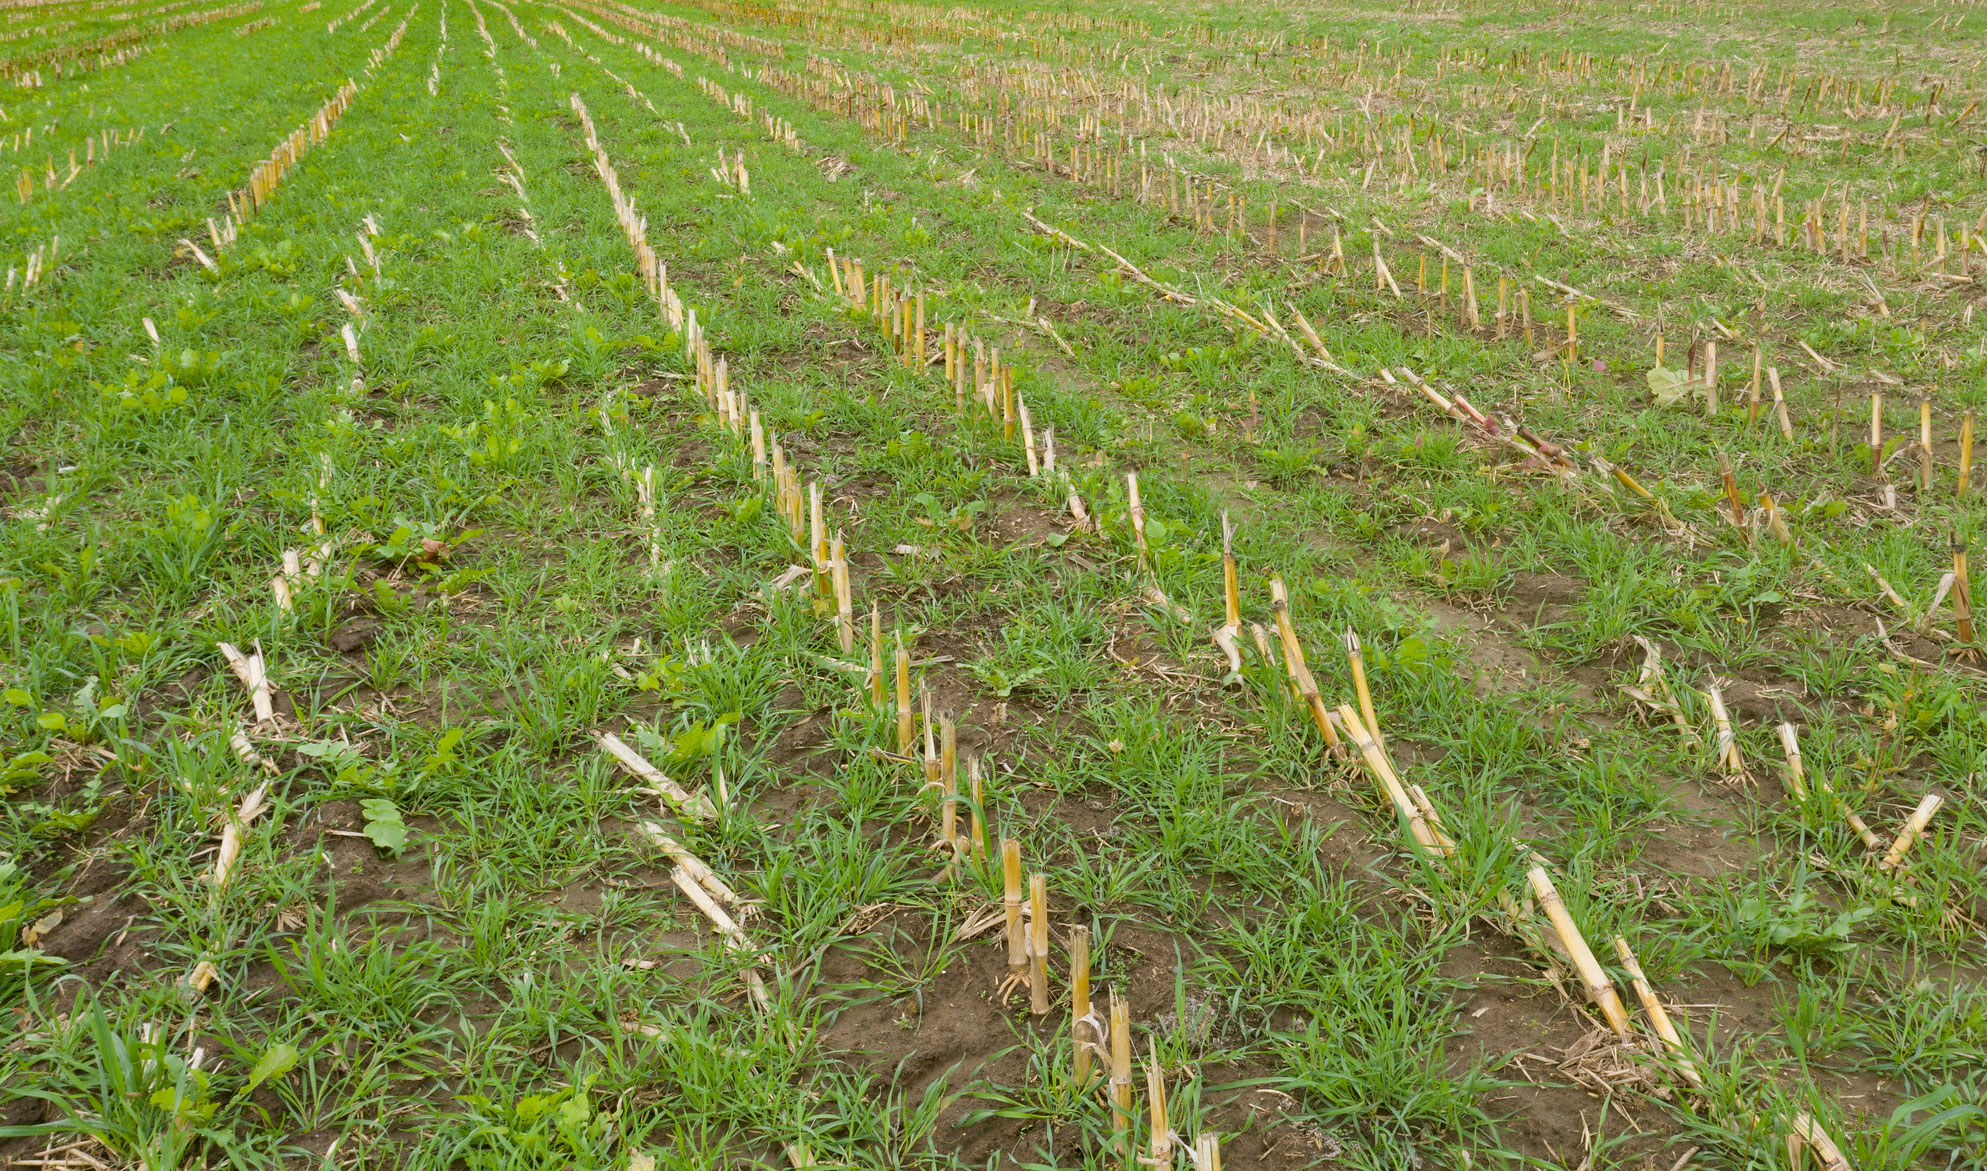 Cover crops growing in a field of harvested corn.